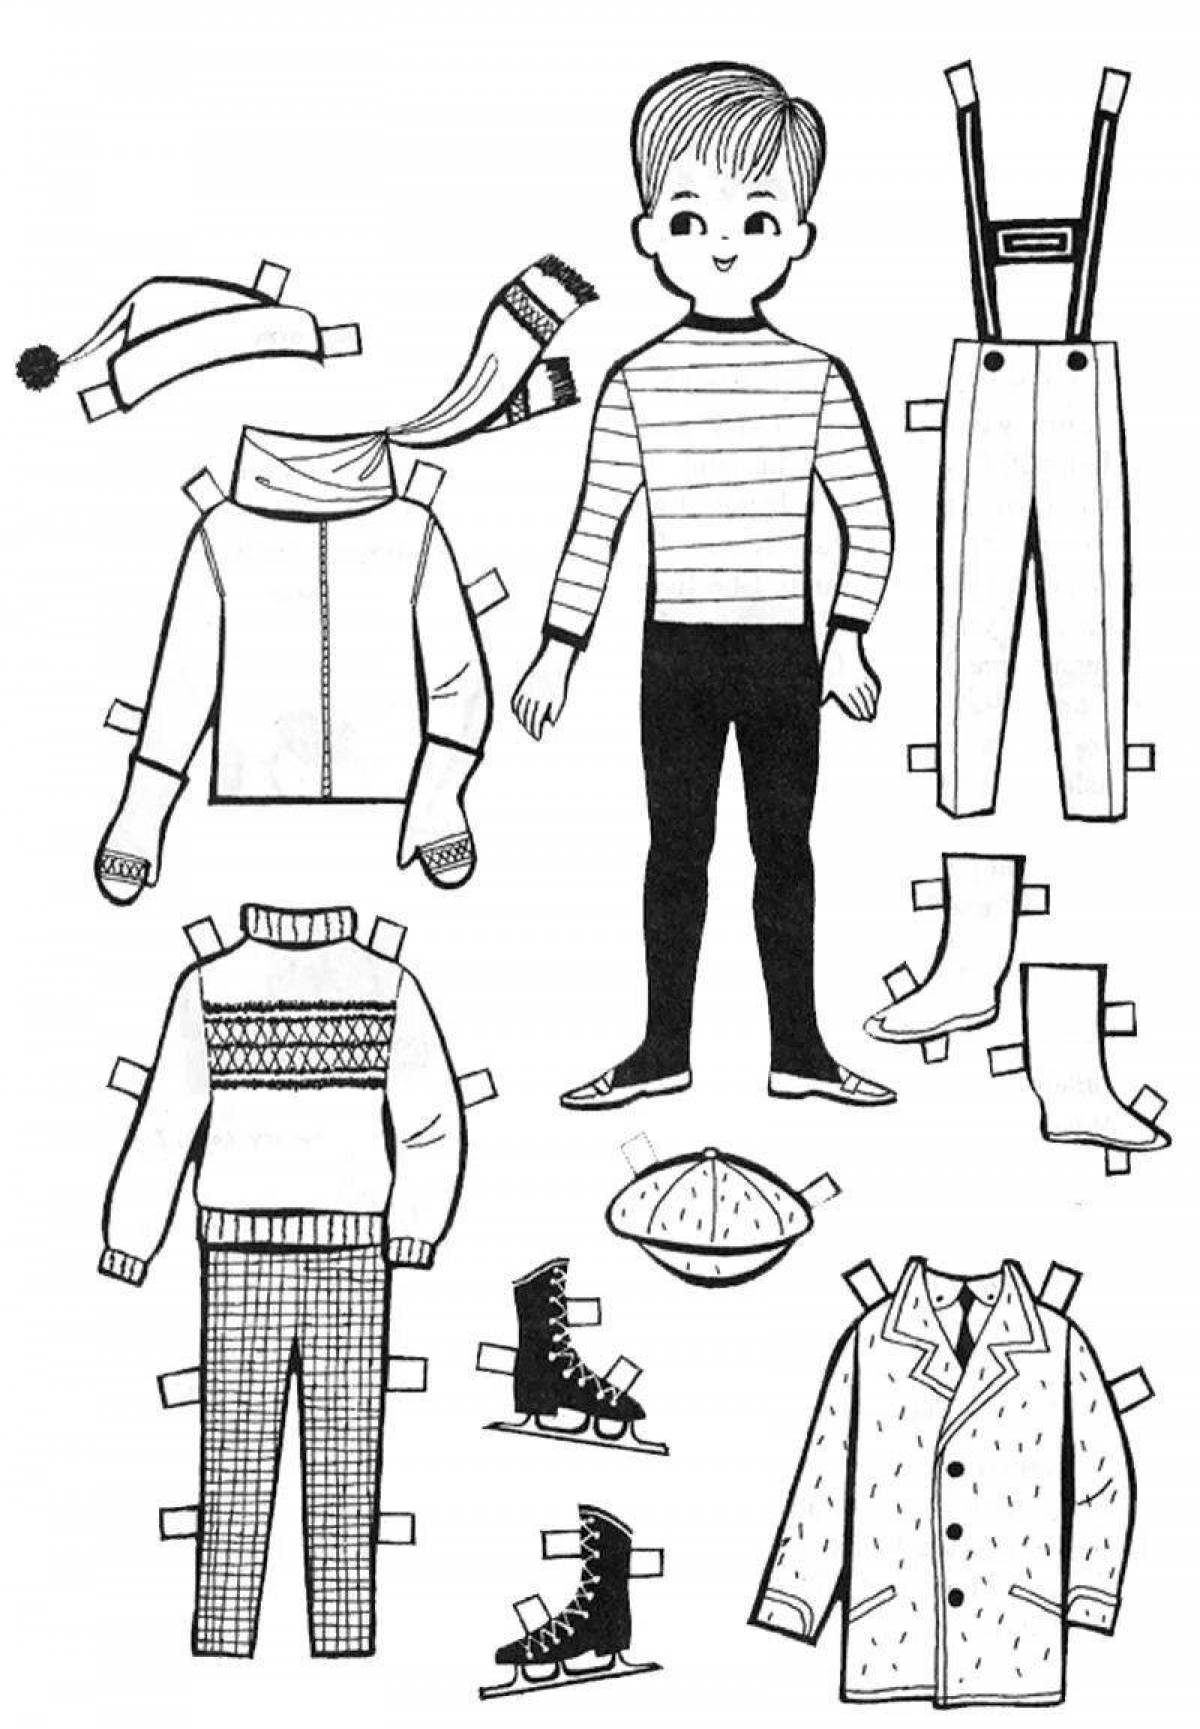 Playful boy paper doll with clothes to cut out